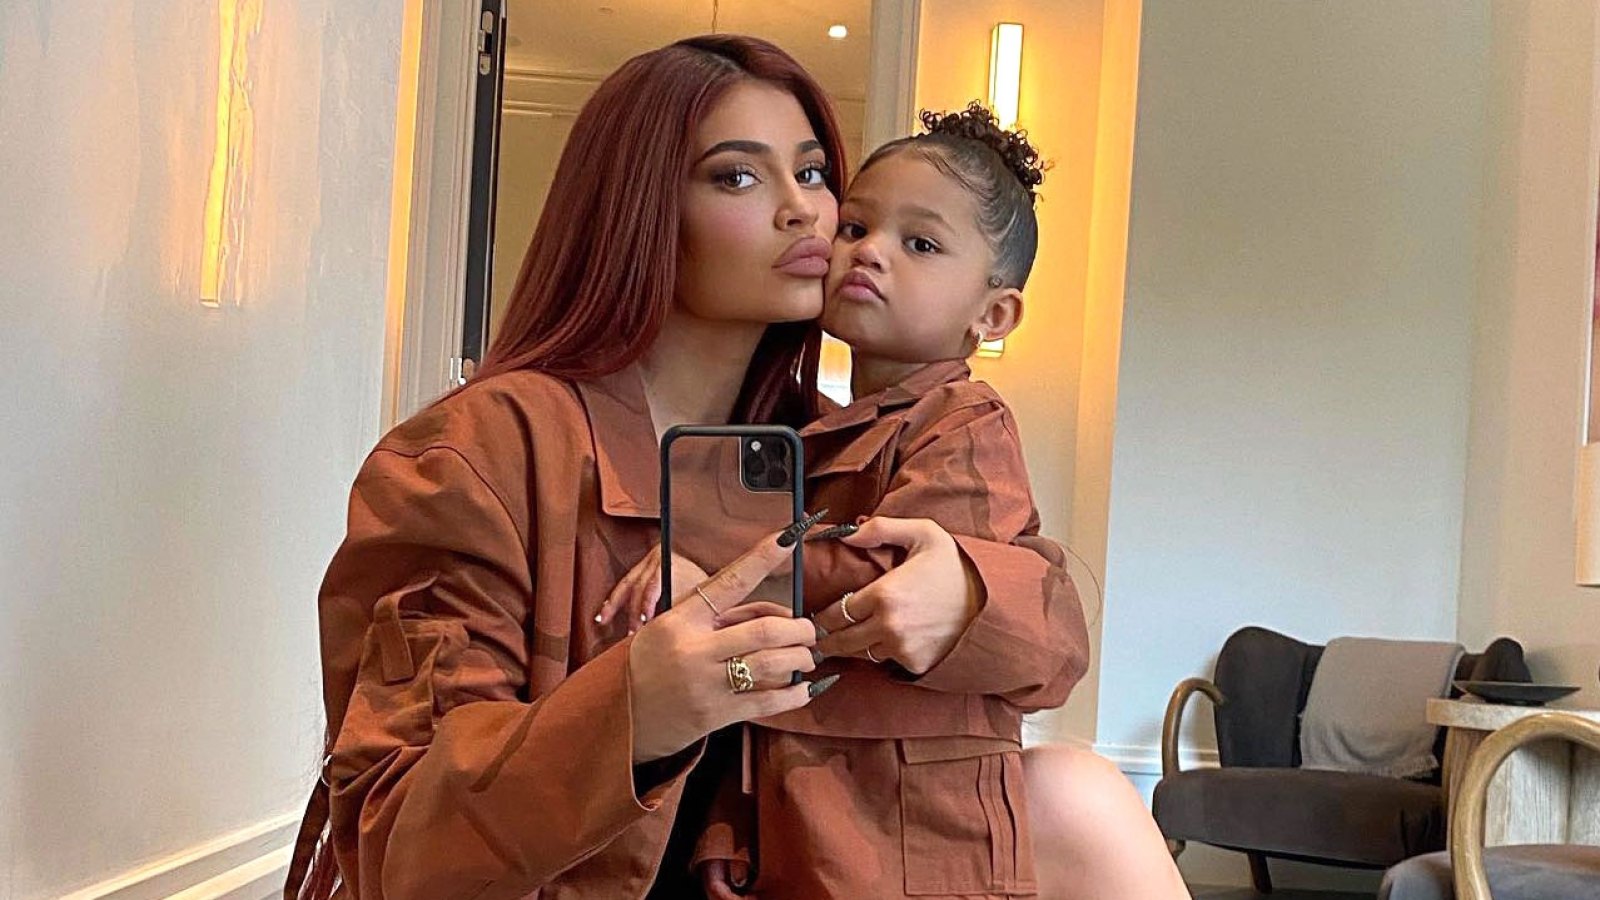 Kylie Jenner Says Stormi Loves to Make Me Coffee and Shares Video of Her Skills